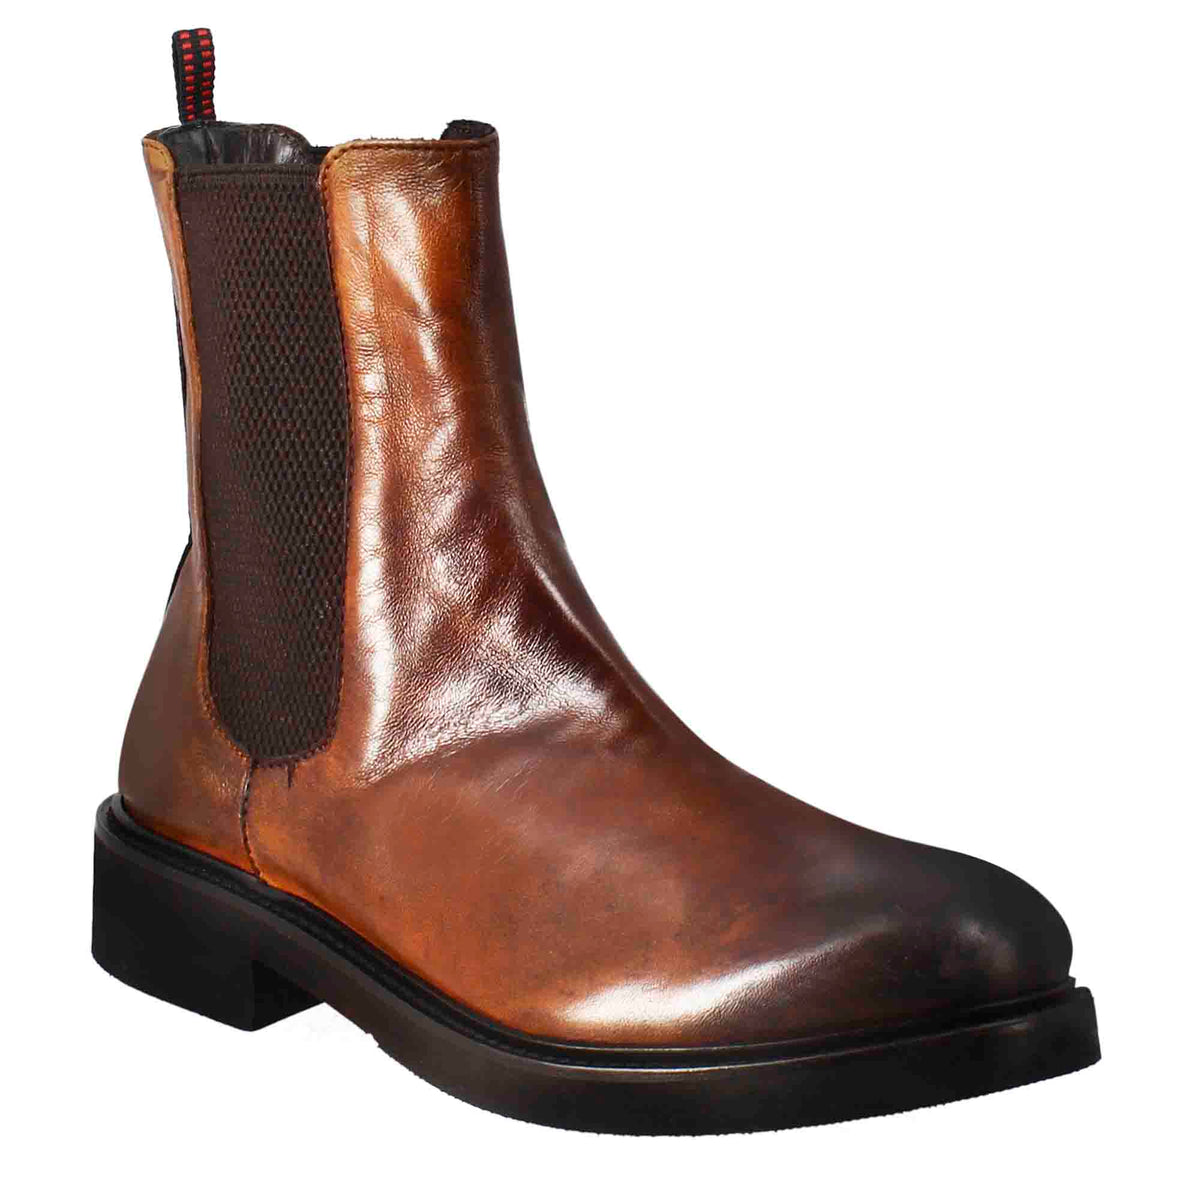 Paupa women's chelsea boot in dark tan washed leather